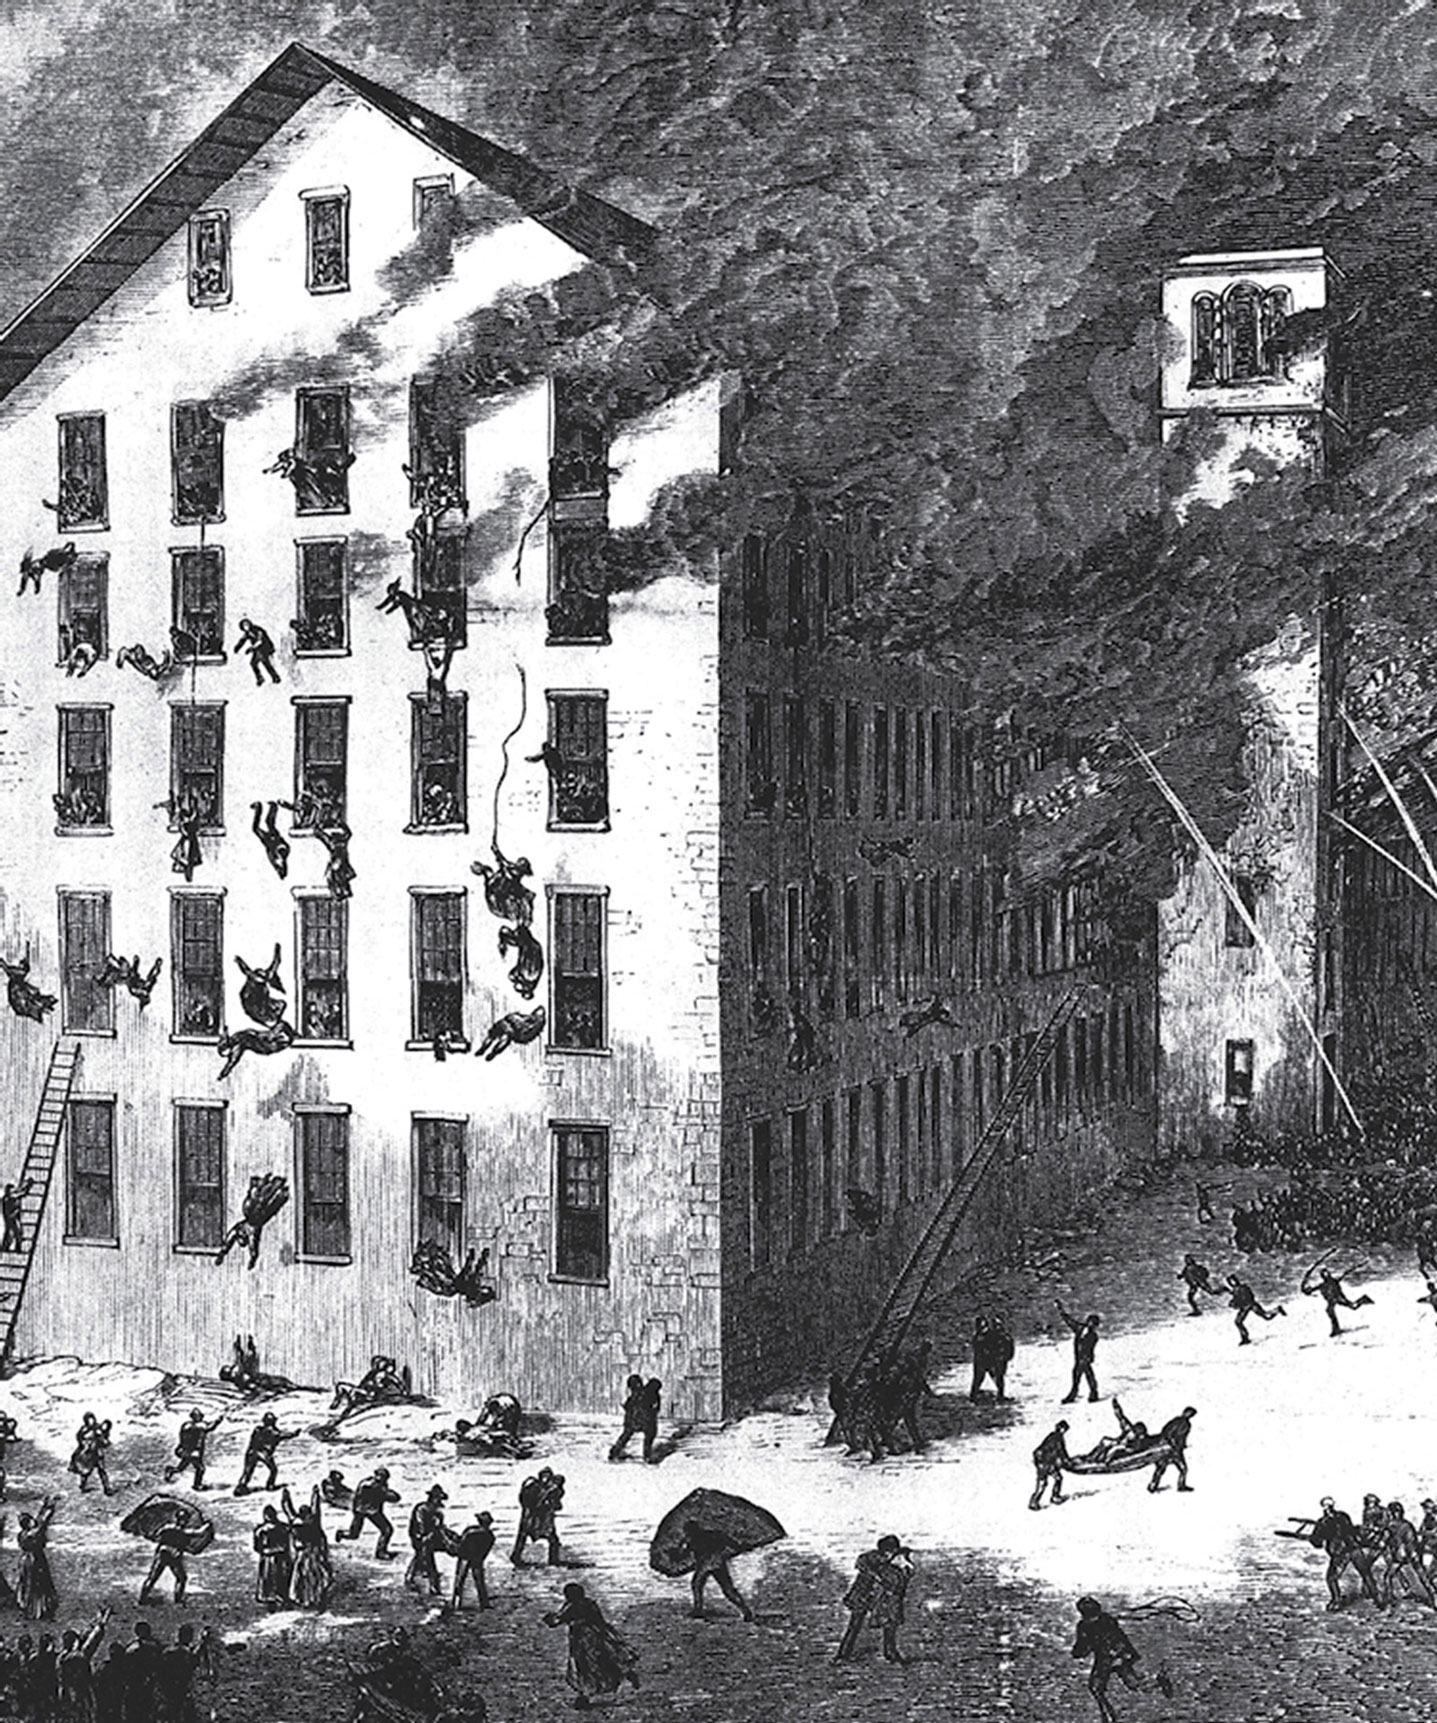 A drawing which depicts the Fall River factory fire of 1874. 